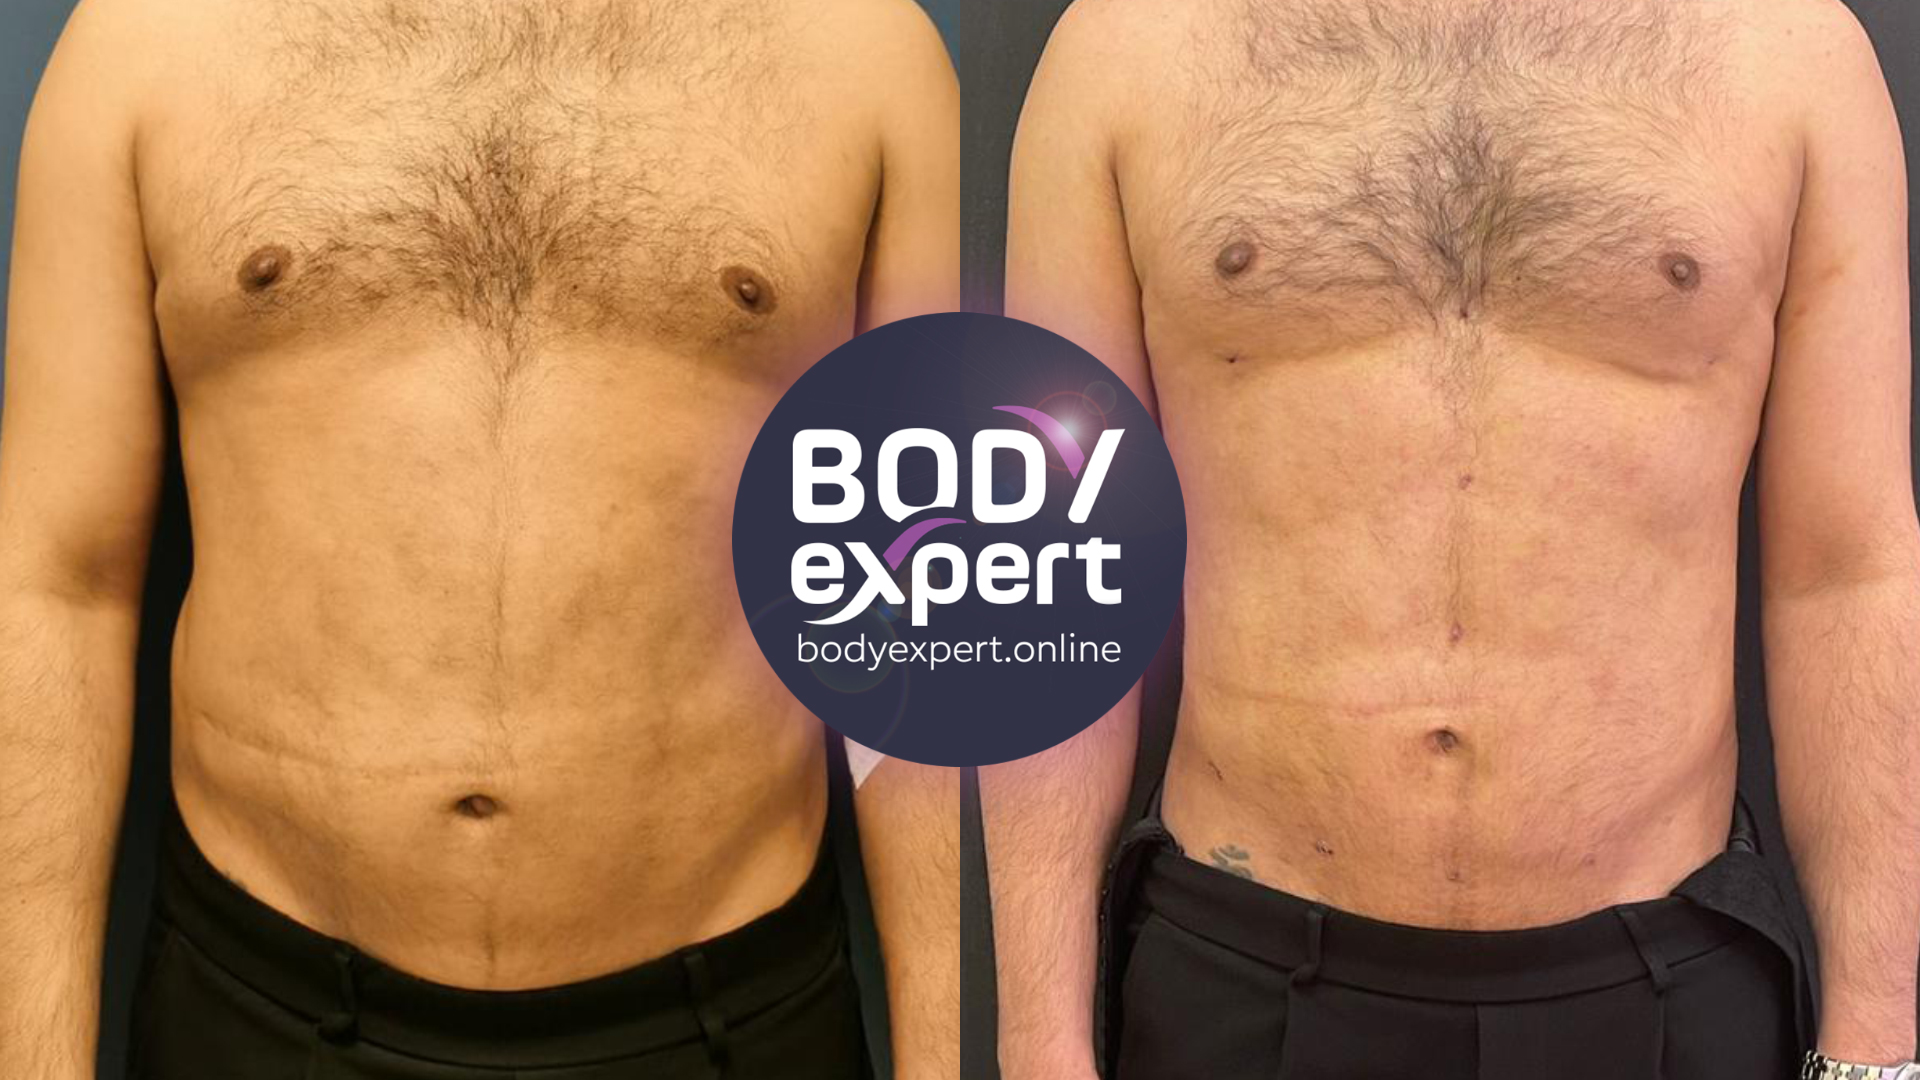 Belly liposuction on men, before and after